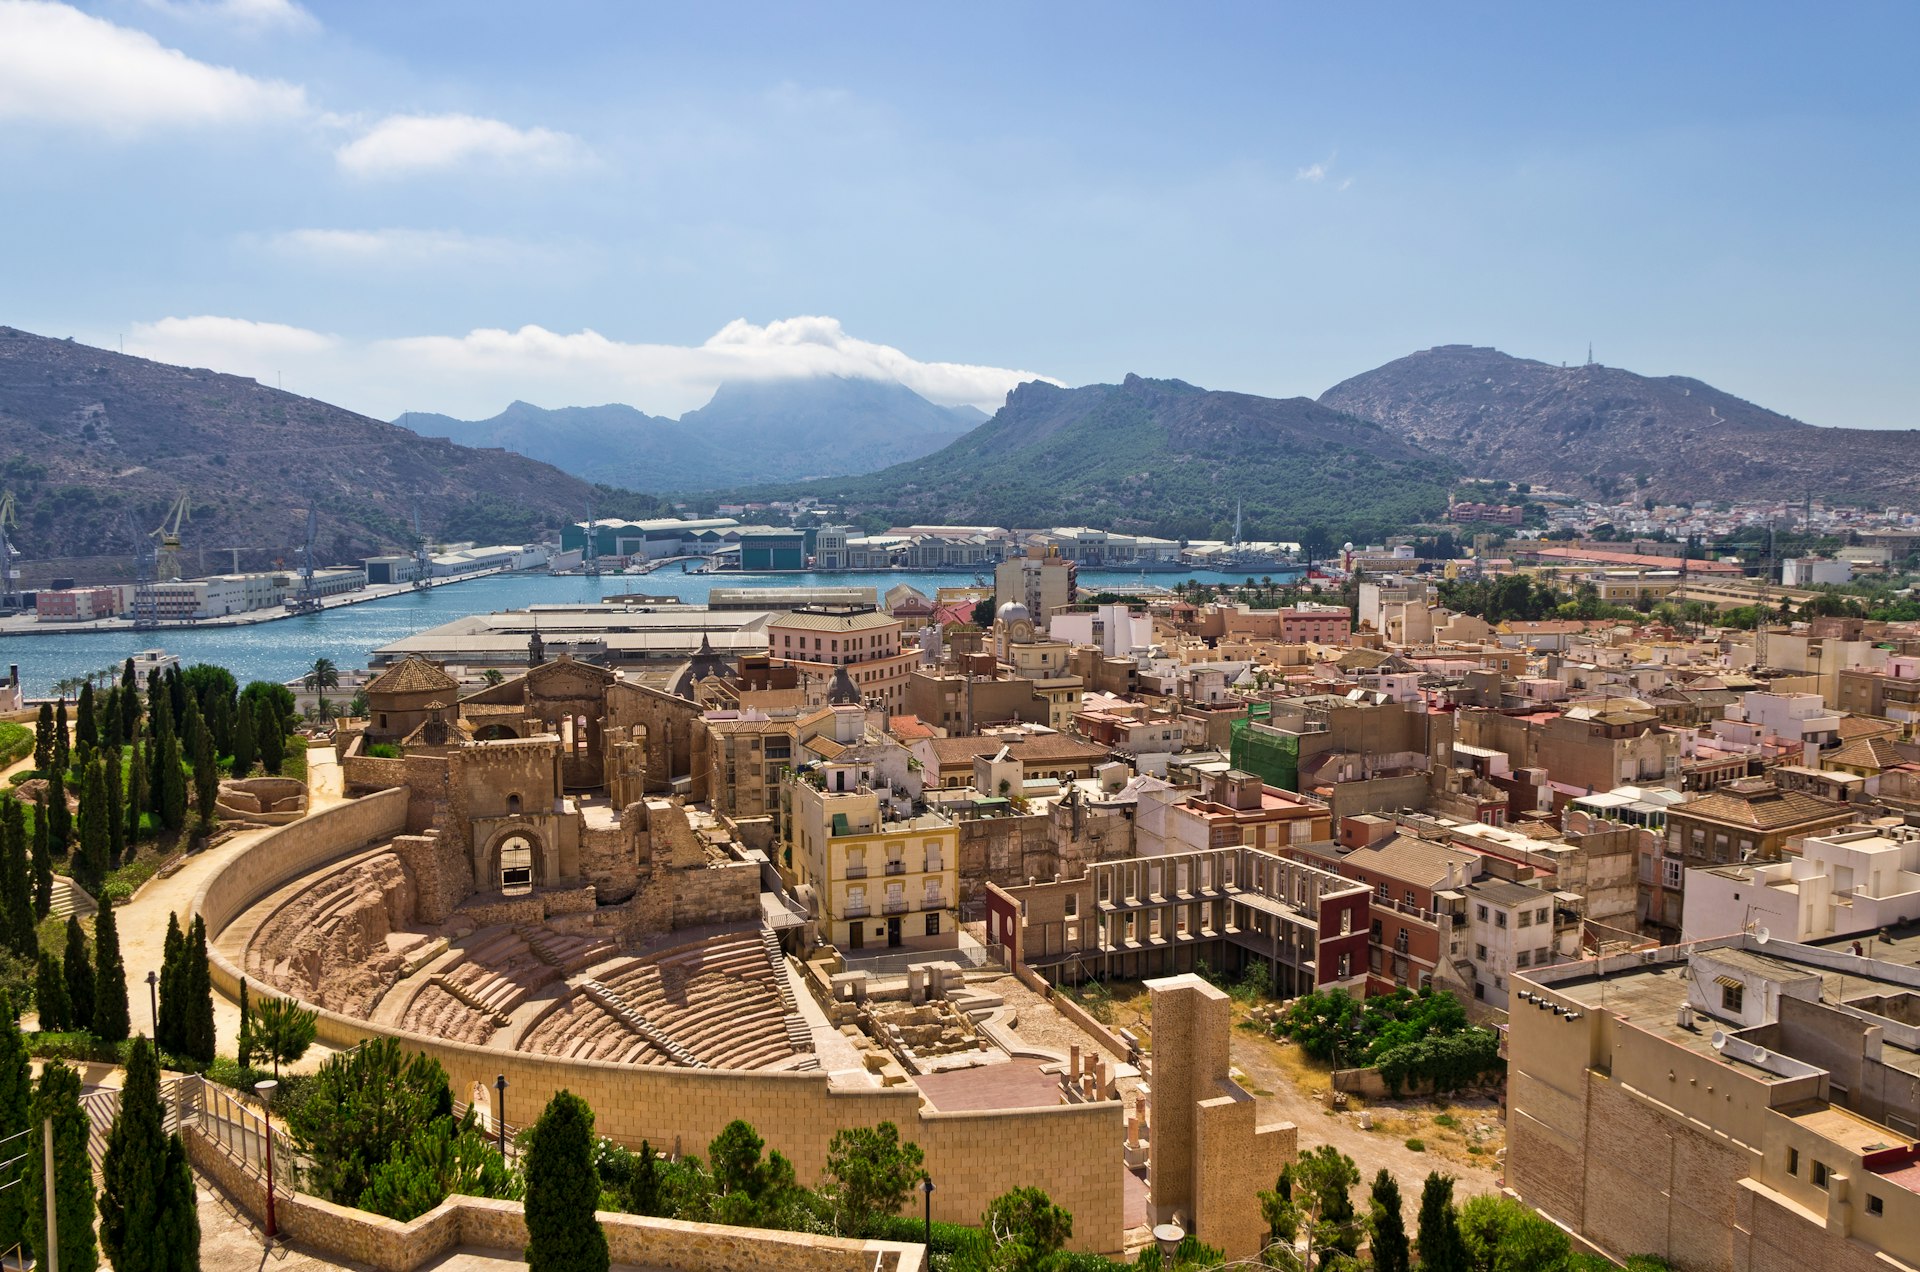 An aerial view of the Roman Theater and other buildings of Cartagena, Murcia, Spain